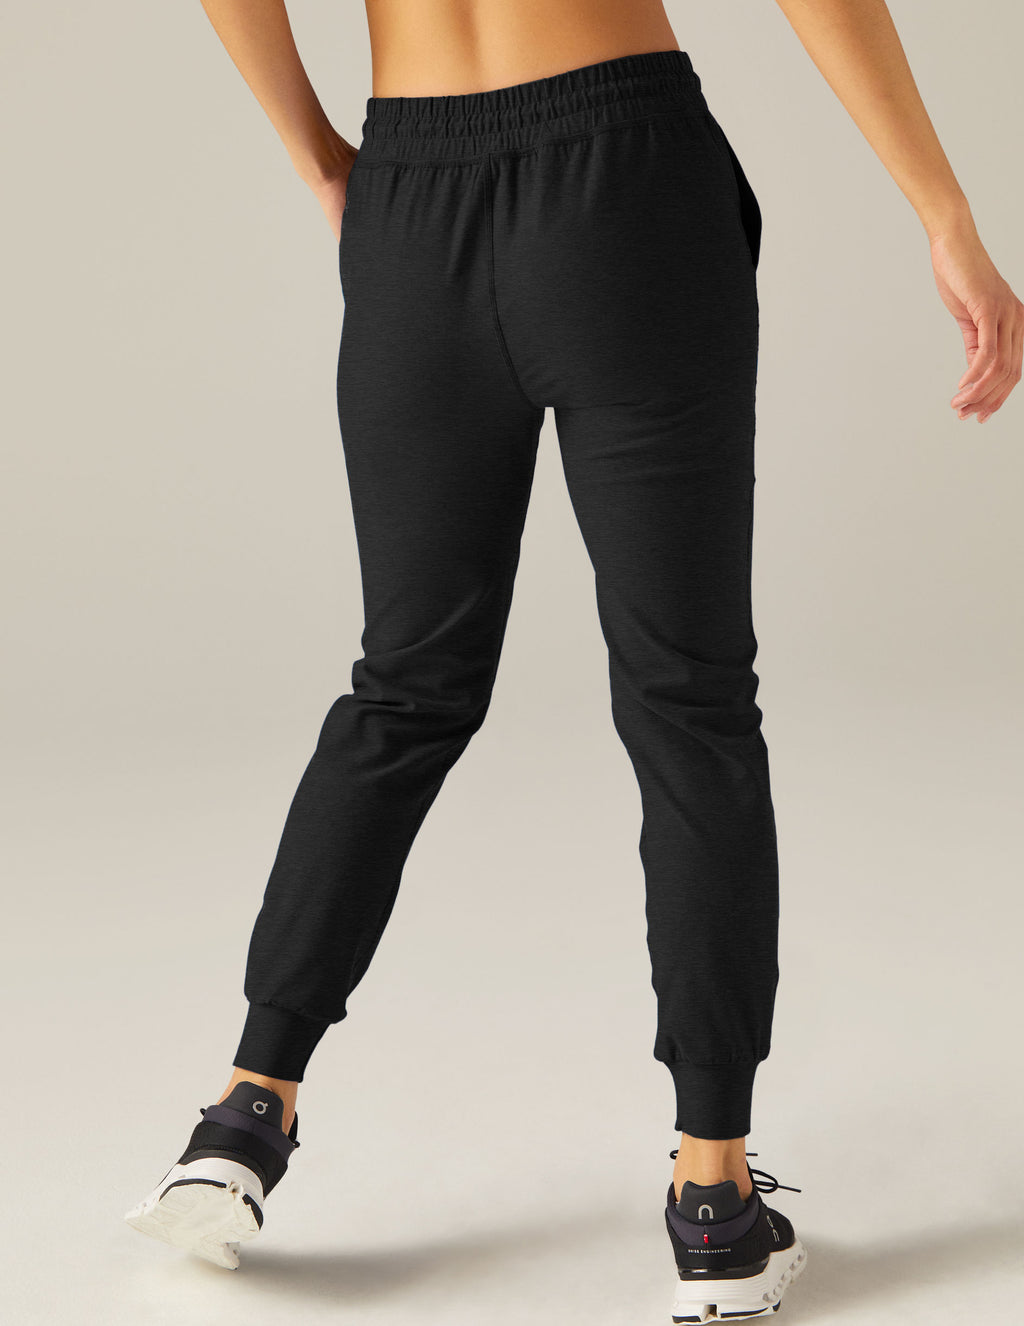  Laite Hebe Sweatpants for Women-Womens Joggers with Pockets  Lounge Pants for Yoga Workout Black : Clothing, Shoes & Jewelry